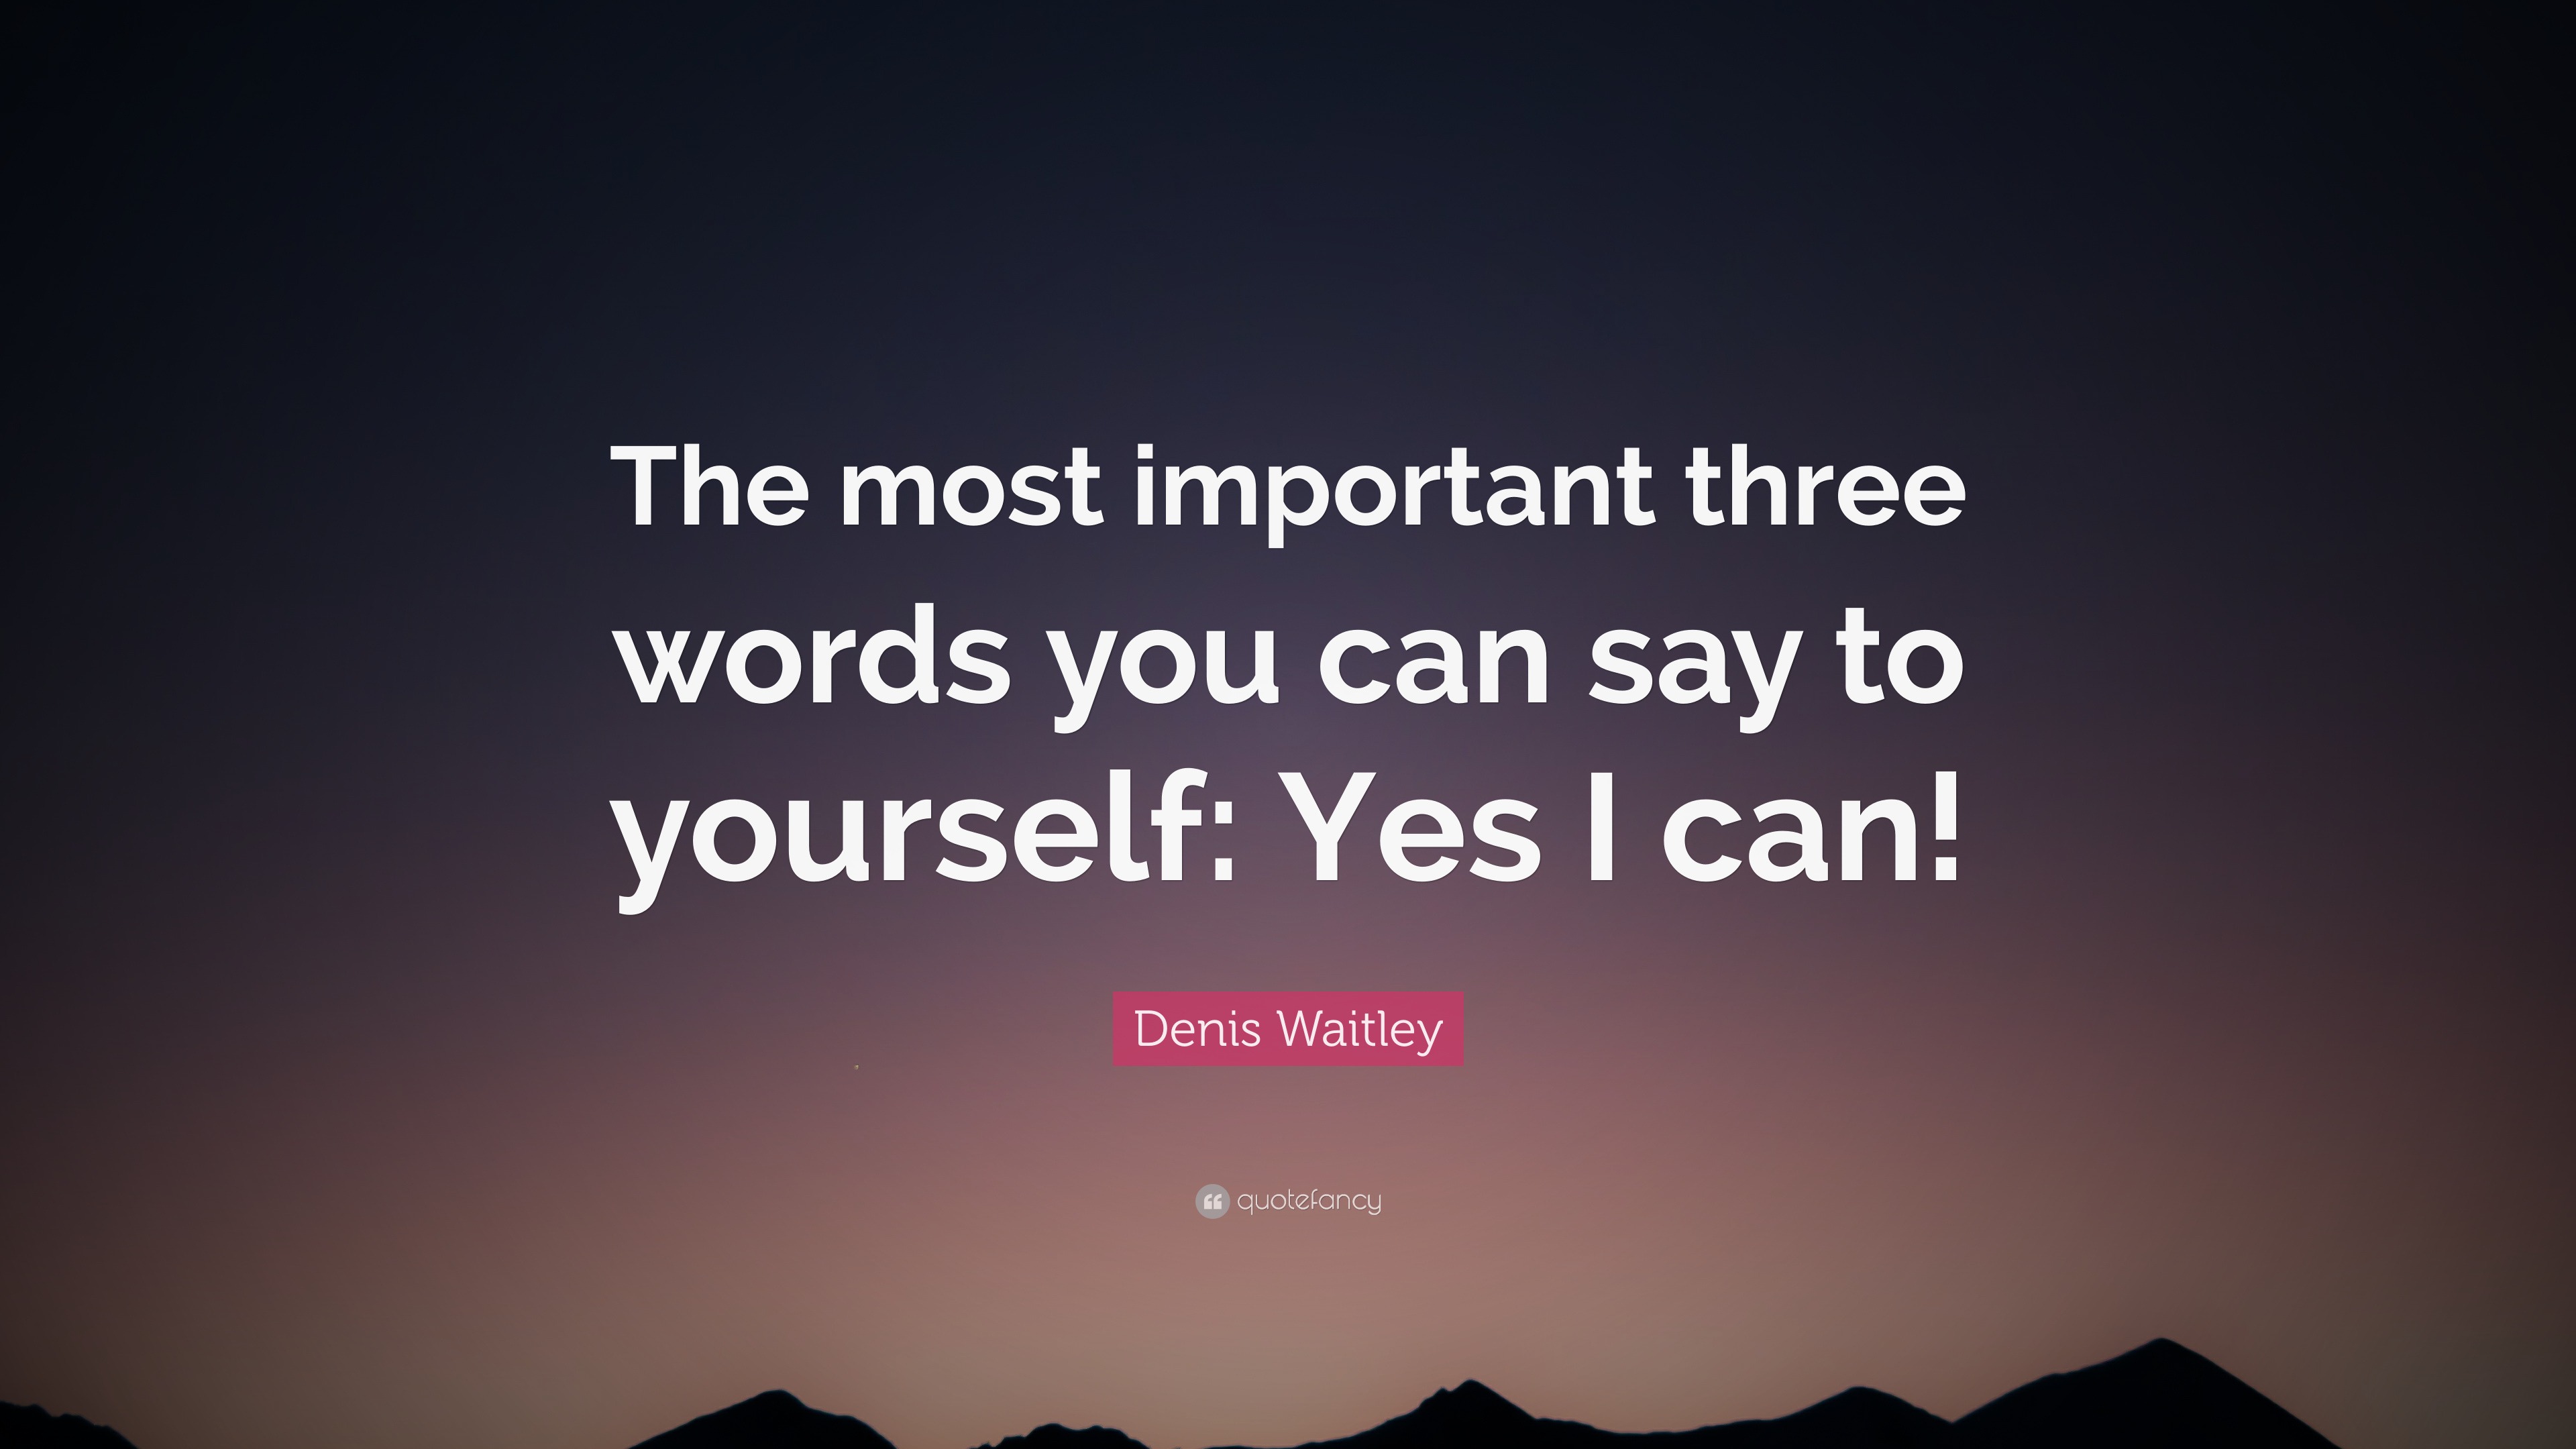 Denis Waitley Quote The Most Important Three Words You Can Say To Yourself Yes I Can 12 Wallpapers Quotefancy